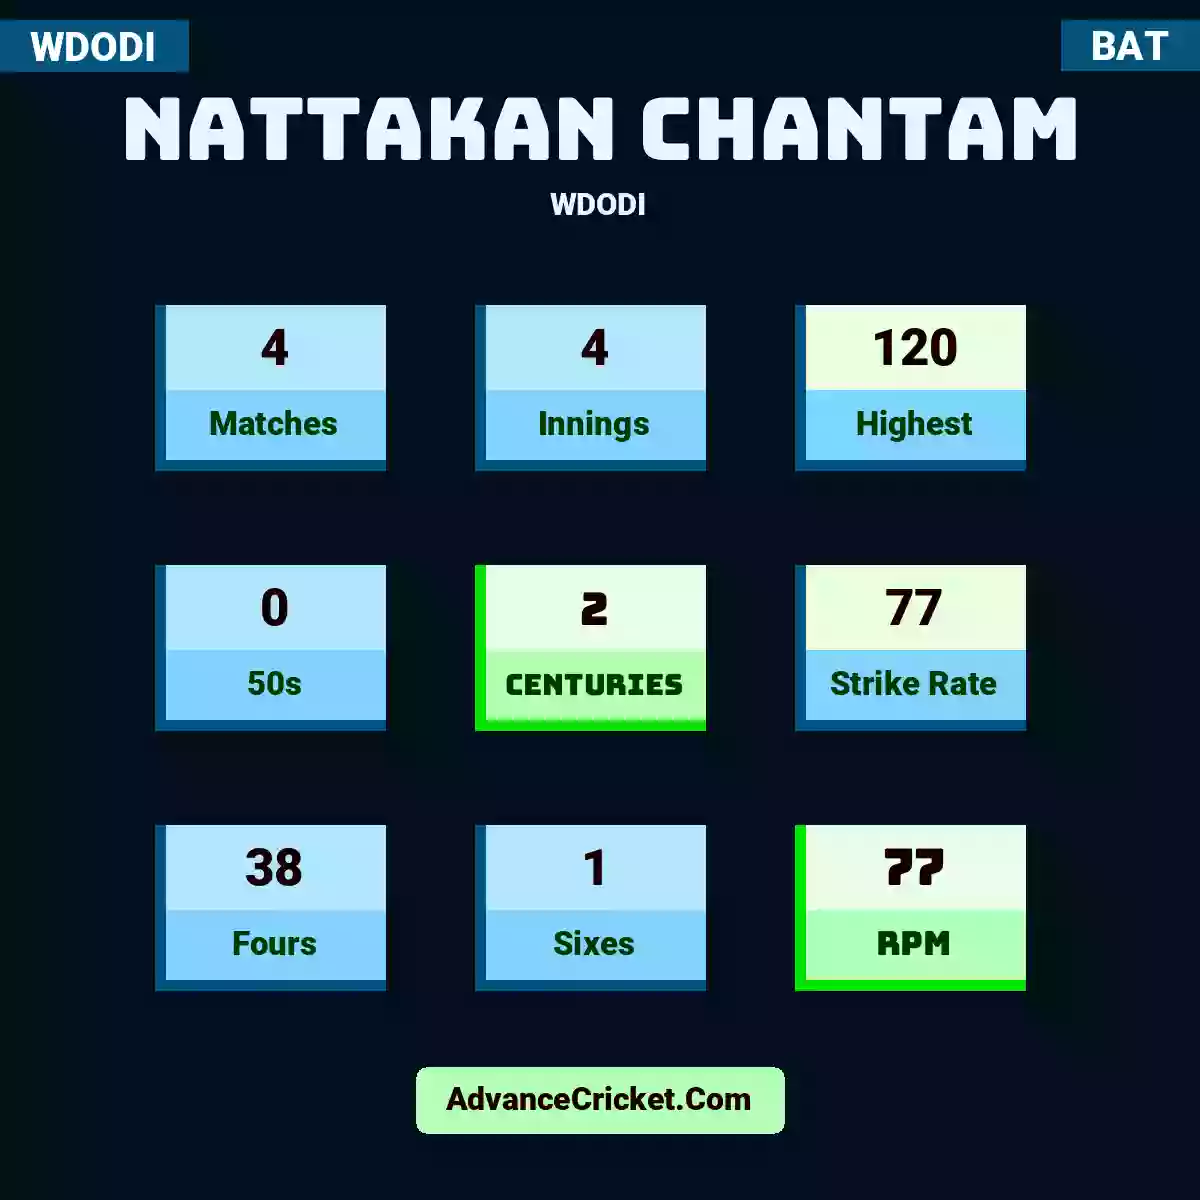 Nattakan Chantam WDODI , Nattakan Chantam played 4 matches, scored 120 runs as highest, 0 half-centuries, and 2 centuries, with a strike rate of 77. N.Chantam hit 38 fours and 1 sixes, with an RPM of 77.